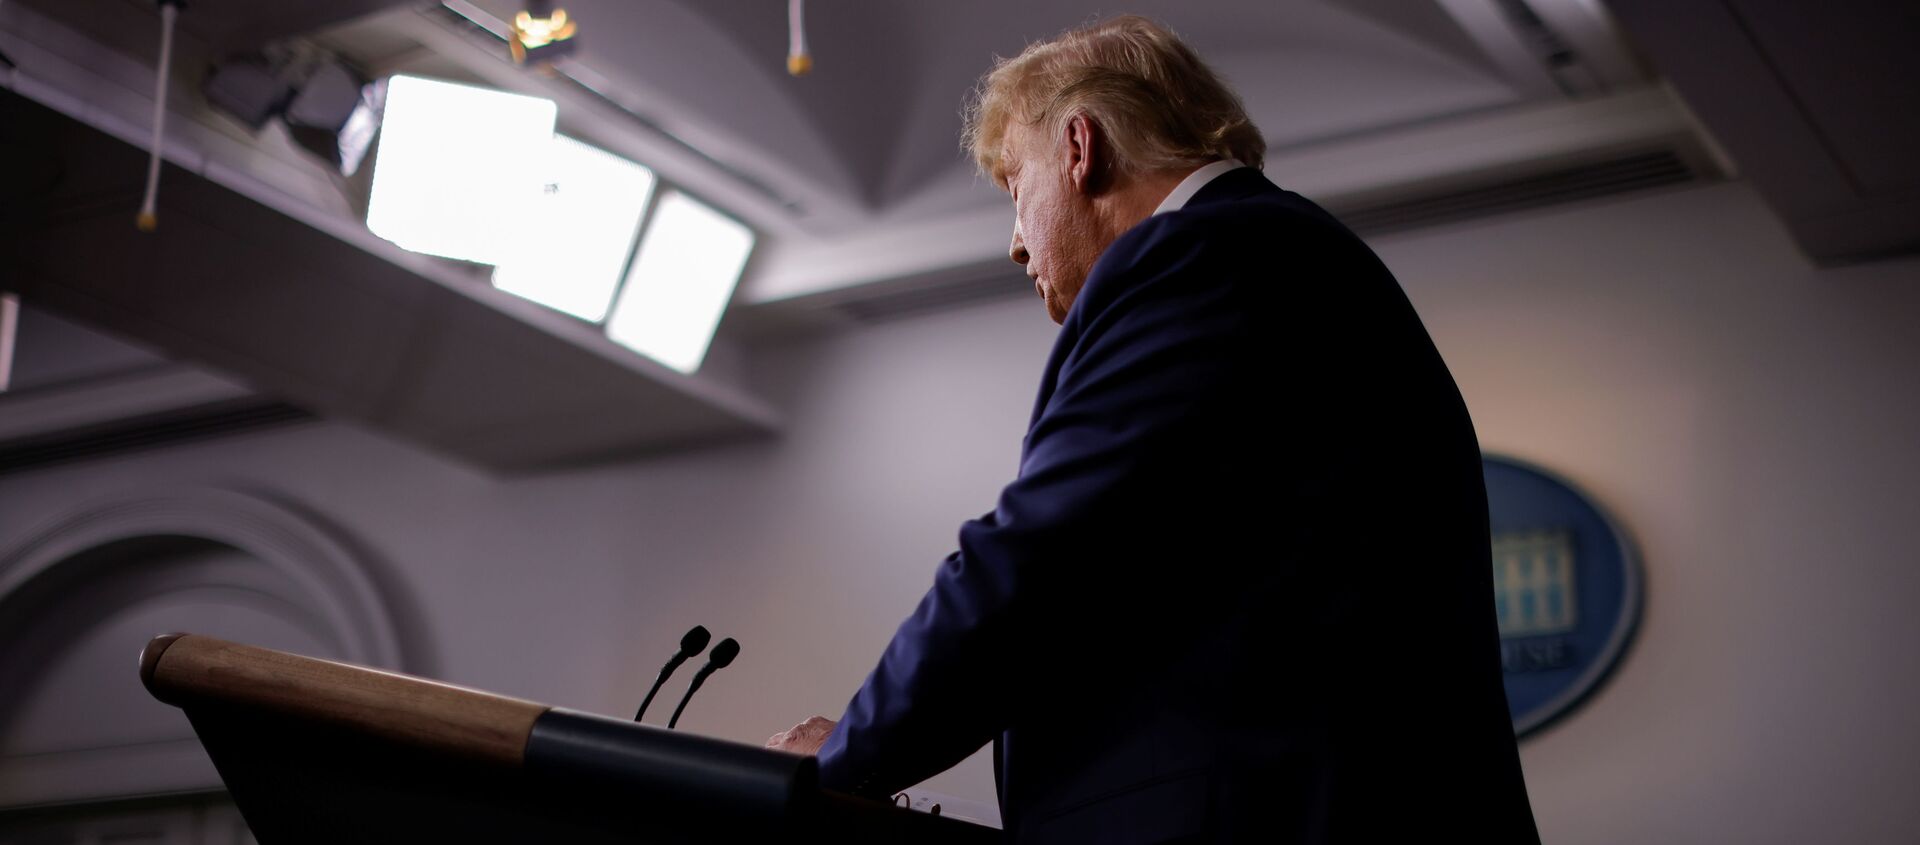 U.S. President Donald Trump speaks about prescription drug prices during an appearance in the Brady Press Briefing Room at the White House in Washington, U.S., November 20, 2020 - Sputnik International, 1920, 22.11.2020